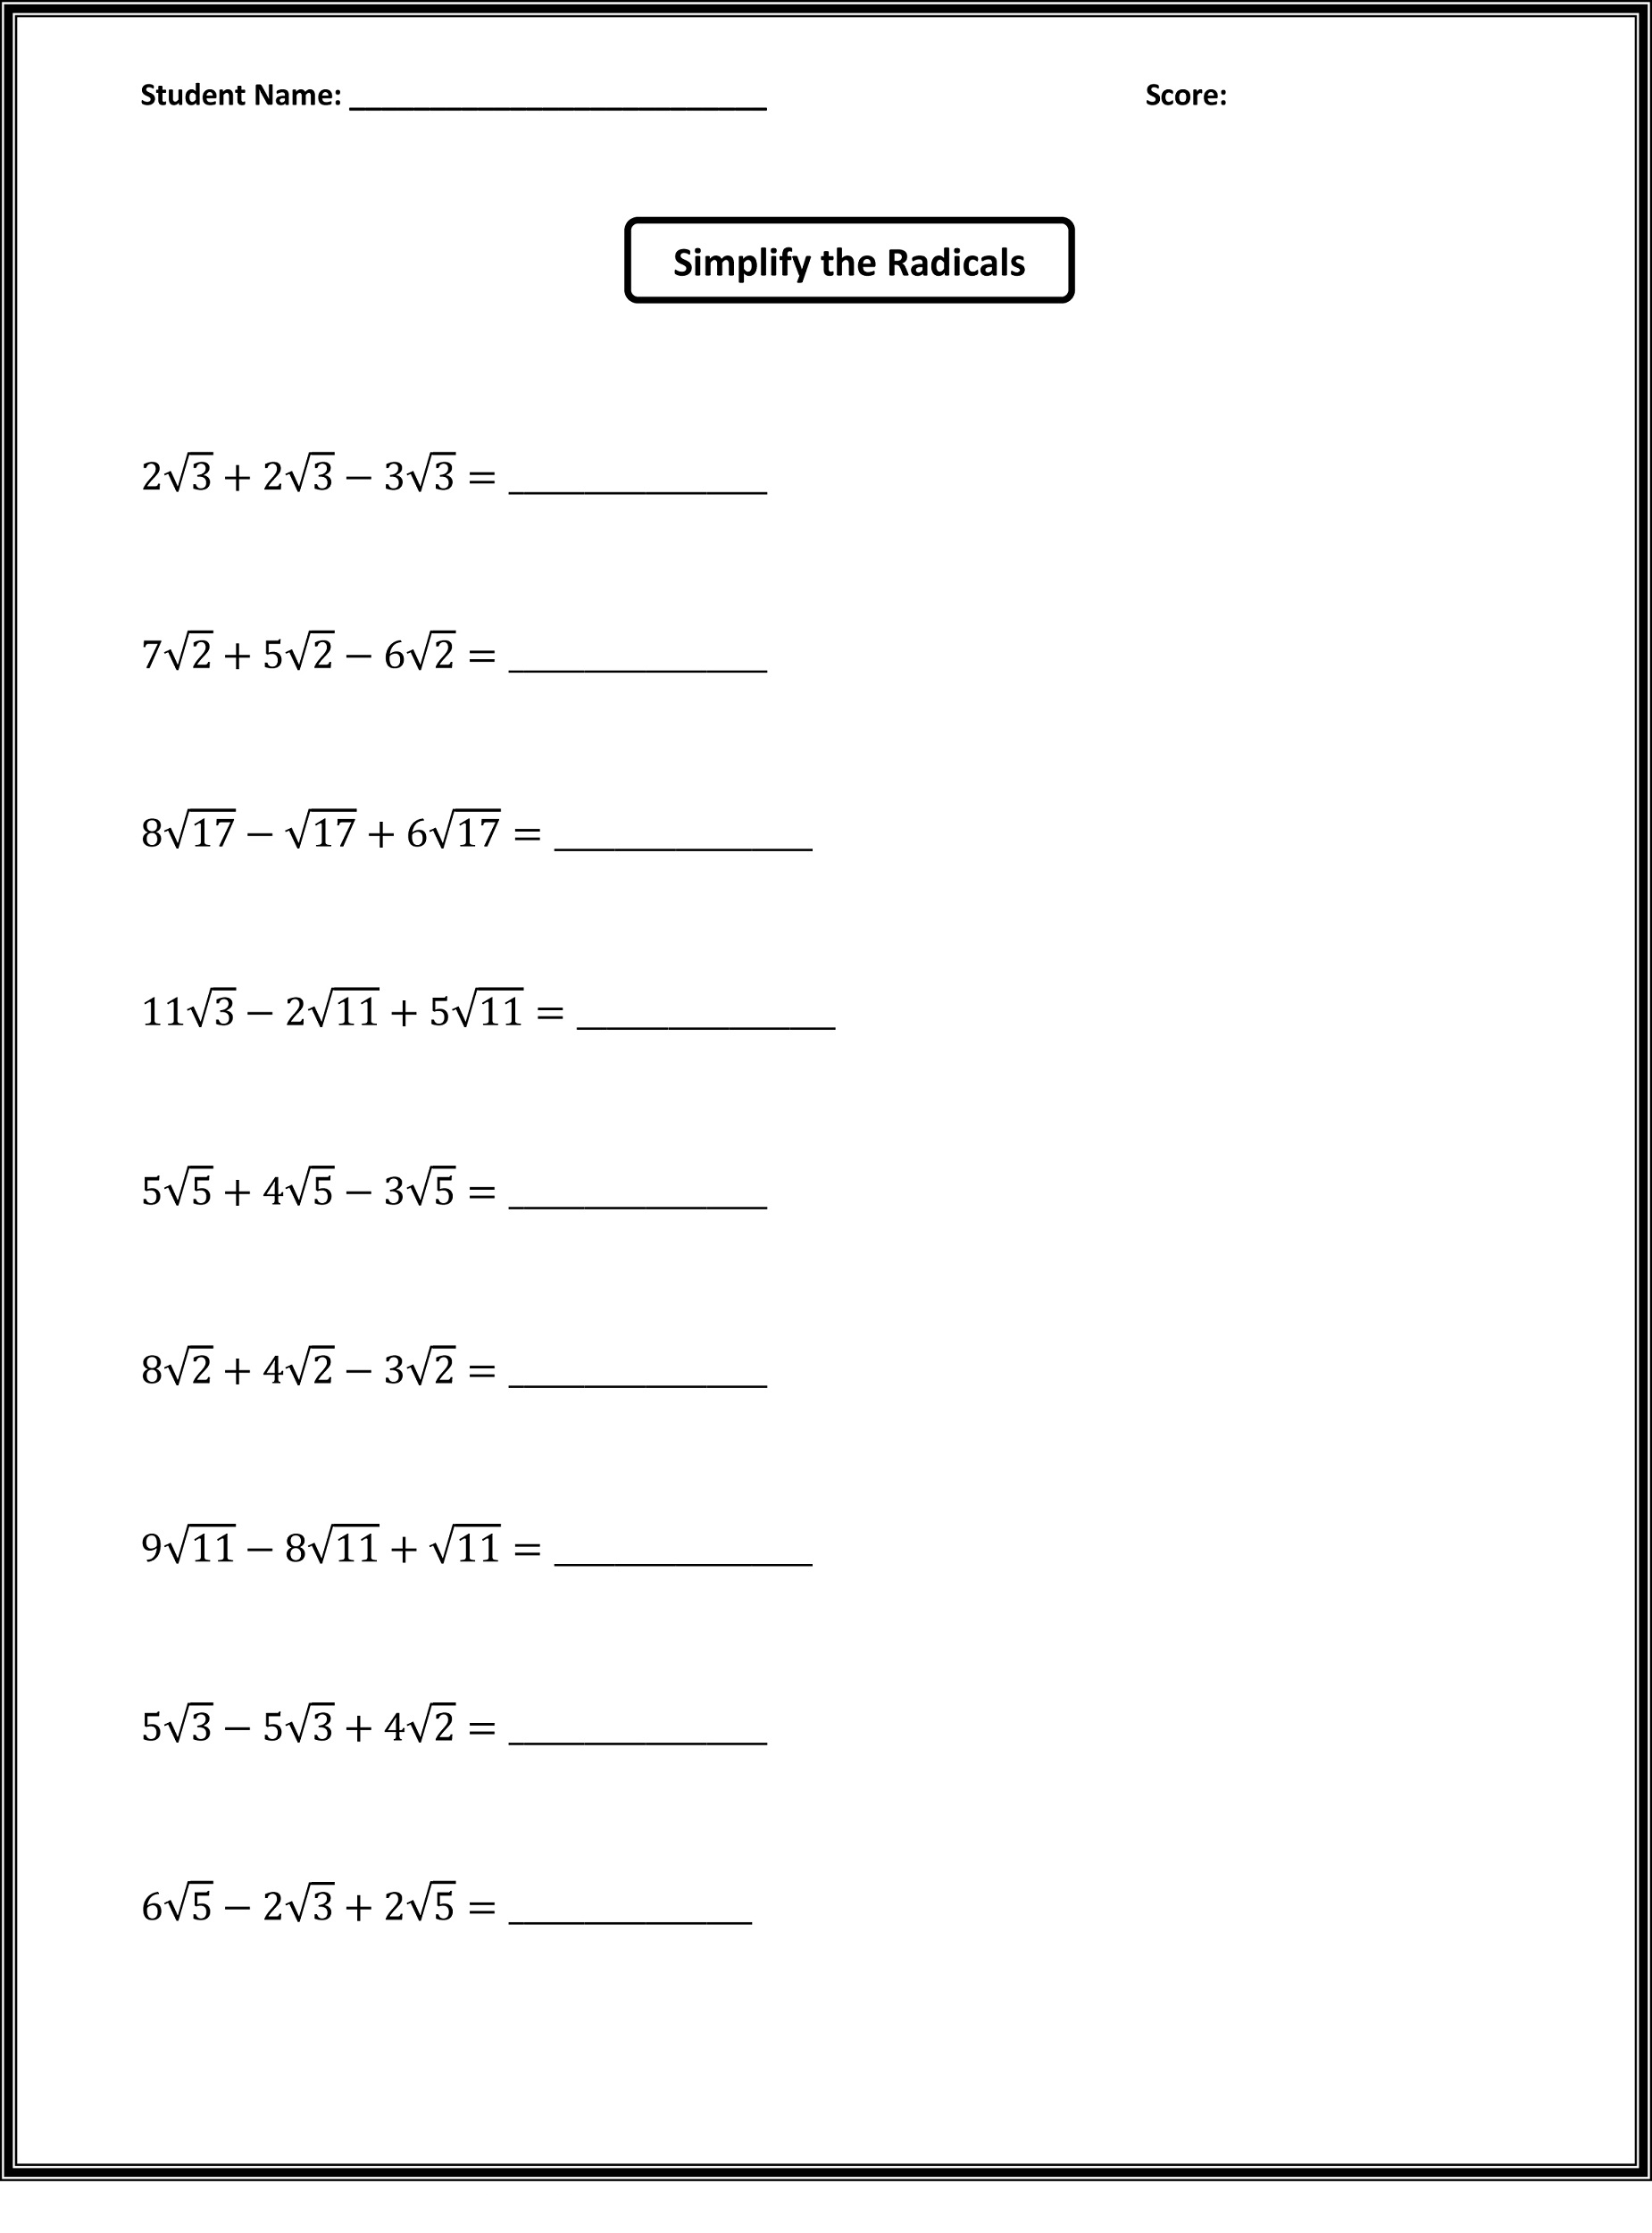 free-math-worksheets-for-grade-6-class-6-ib-cbse-icse-k12-and-all-photos